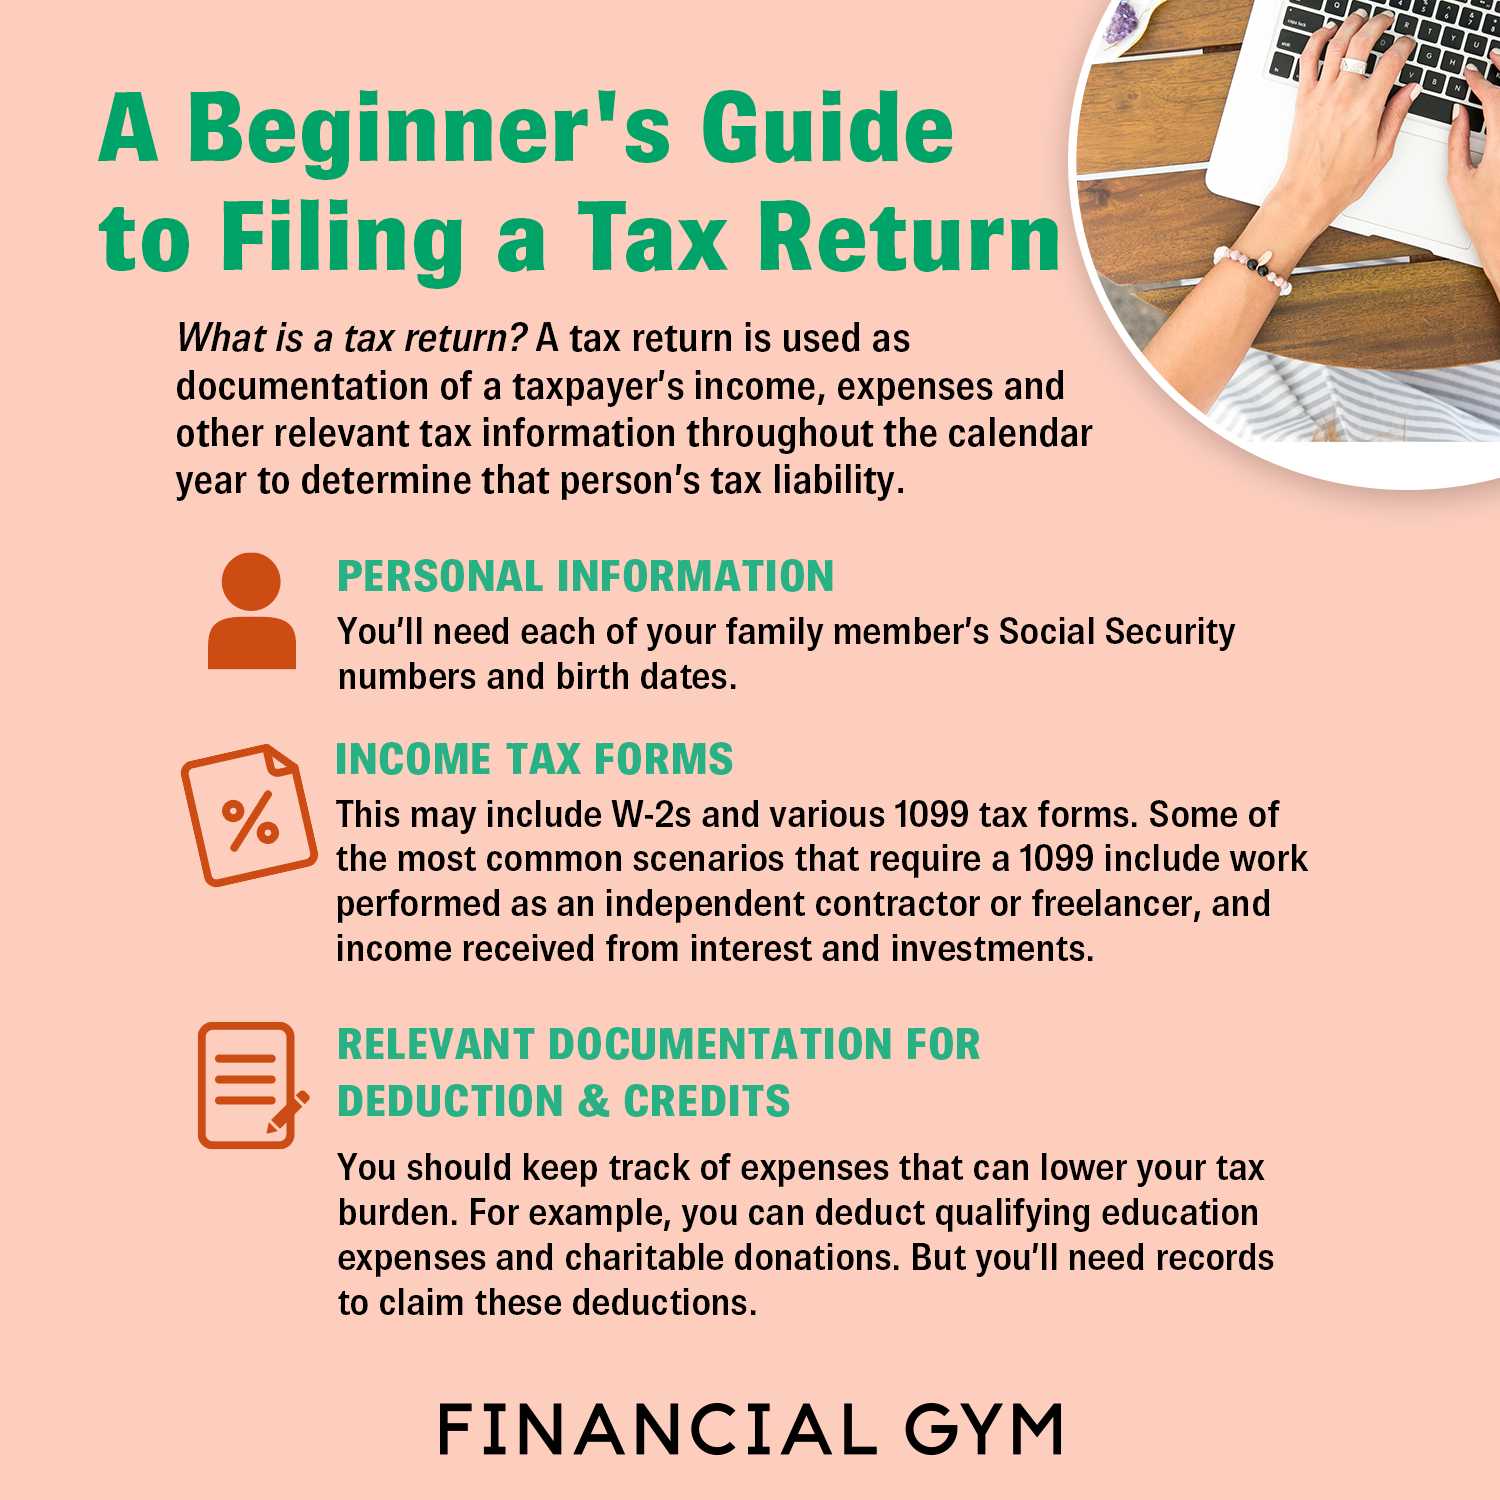 A Beginner's Guide to Filing a Tax Return